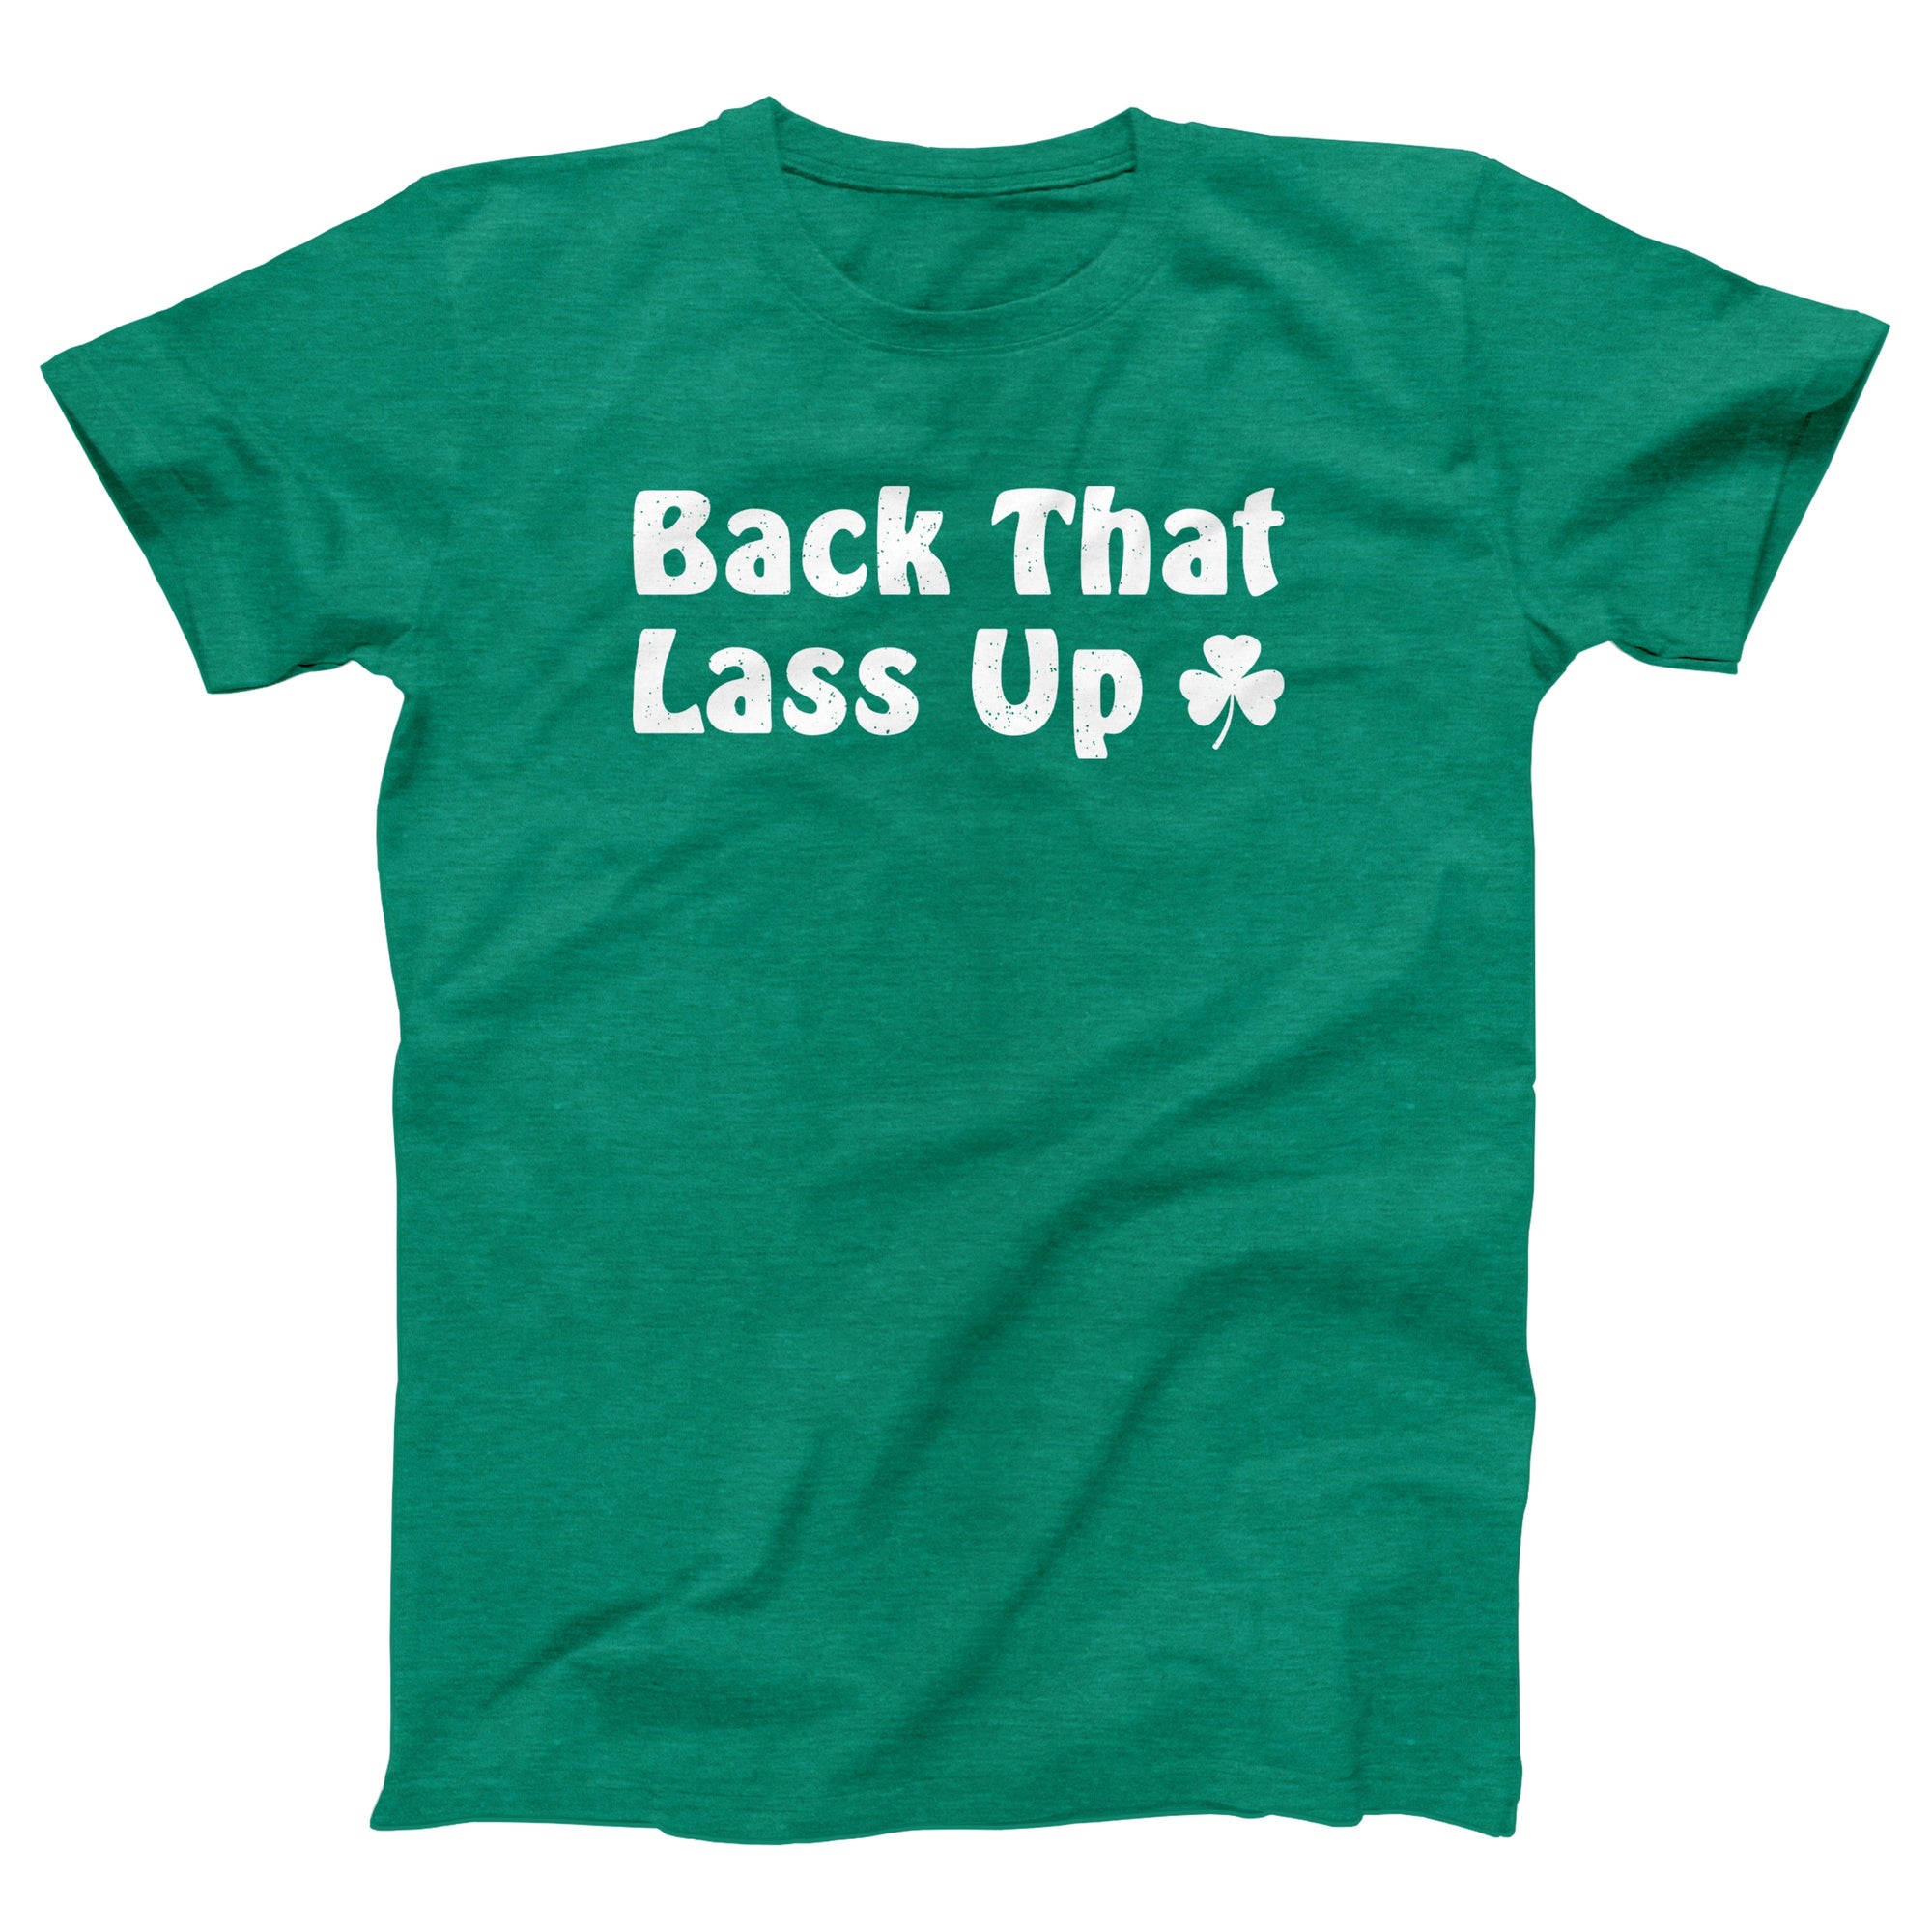 Back That Lass Up Adult Unisex T-Shirt - Twisted Gorilla